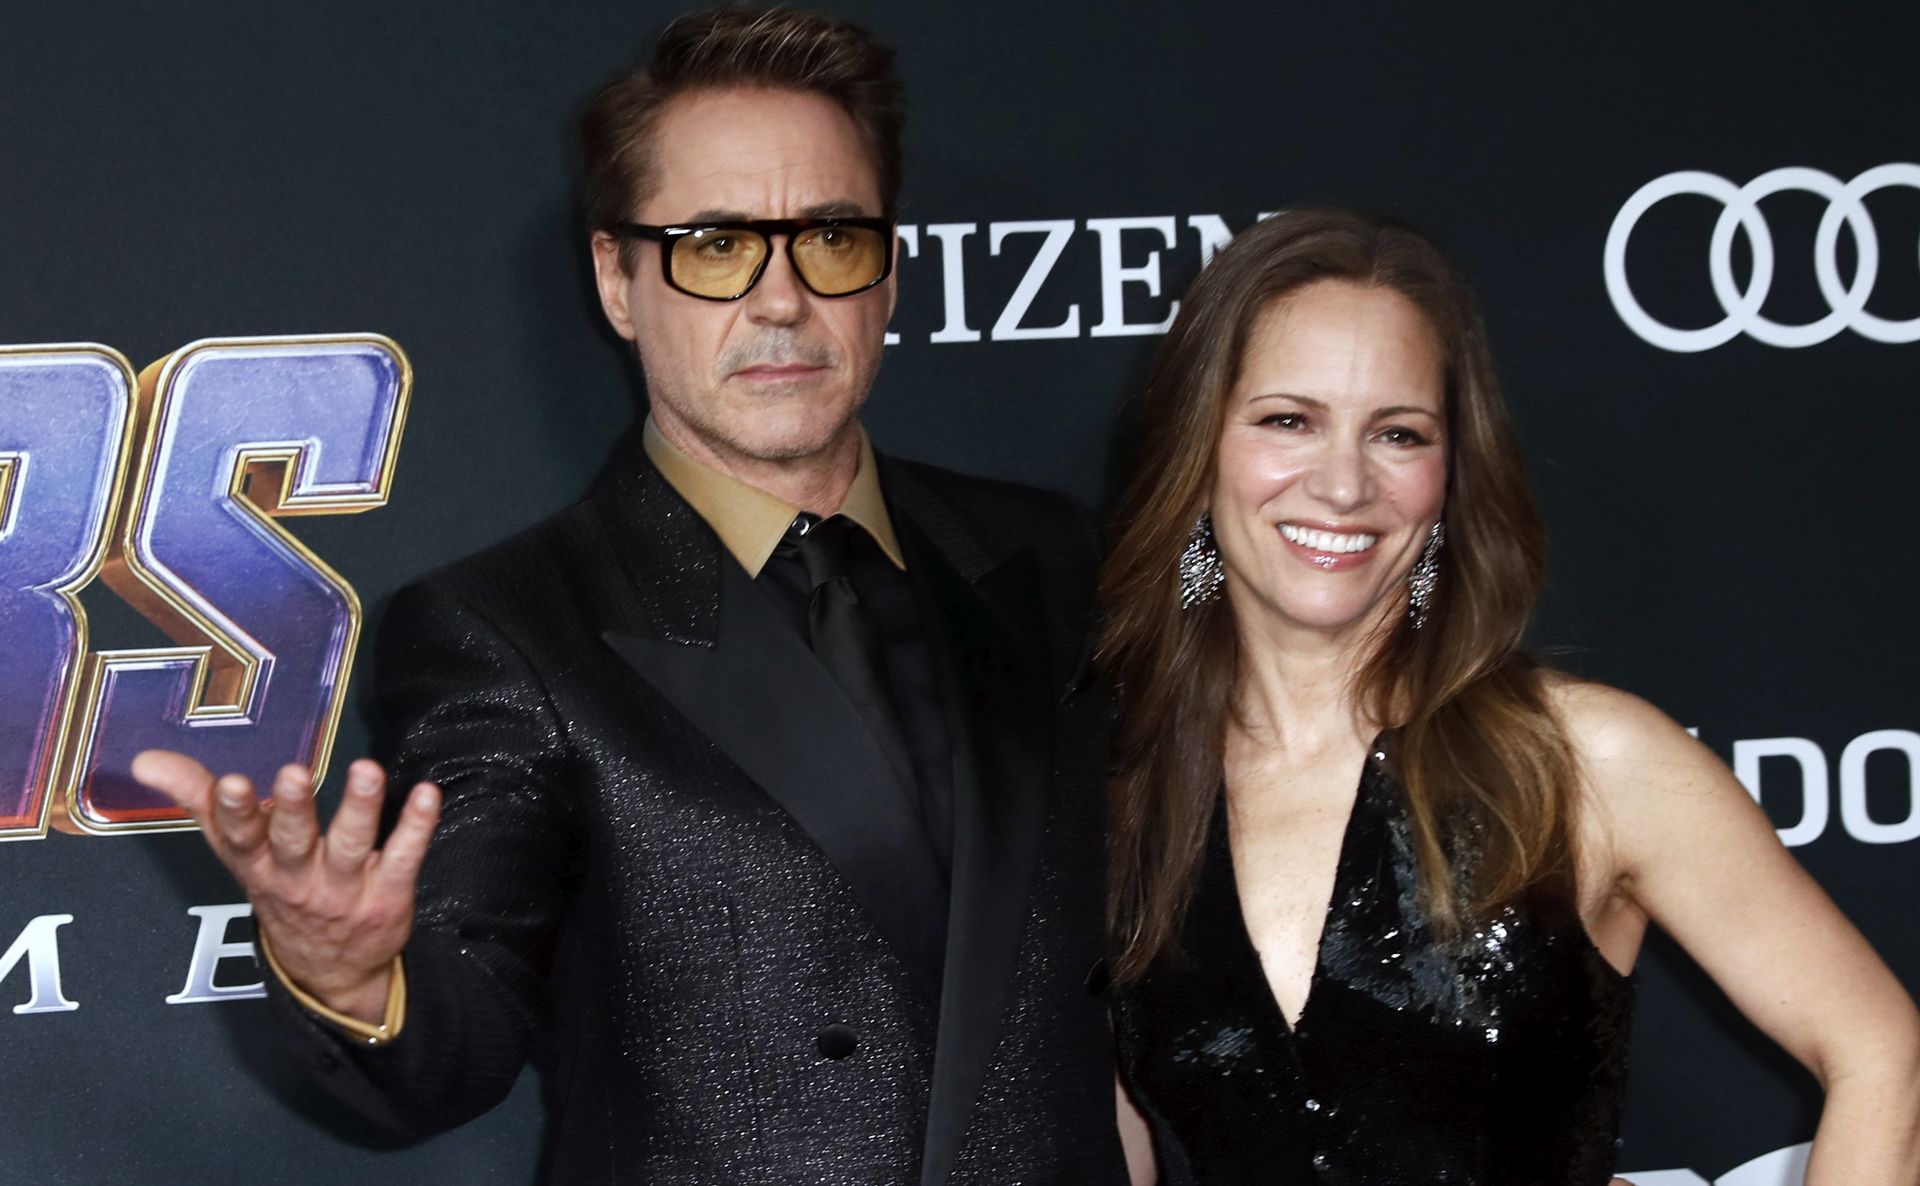 epa07522135 US actor Robert Downey Jr. (L) and Susan Downey (R) pose for the photographers upon their arrival for the premiere of 'Avengers: Endgame' at the LA Convention Center in Los Angeles, California, USA, 22 April 2019. 'Avengers: Endgame' will be released US theaters on 26 April.  EPA/ETIENNE LAURENT